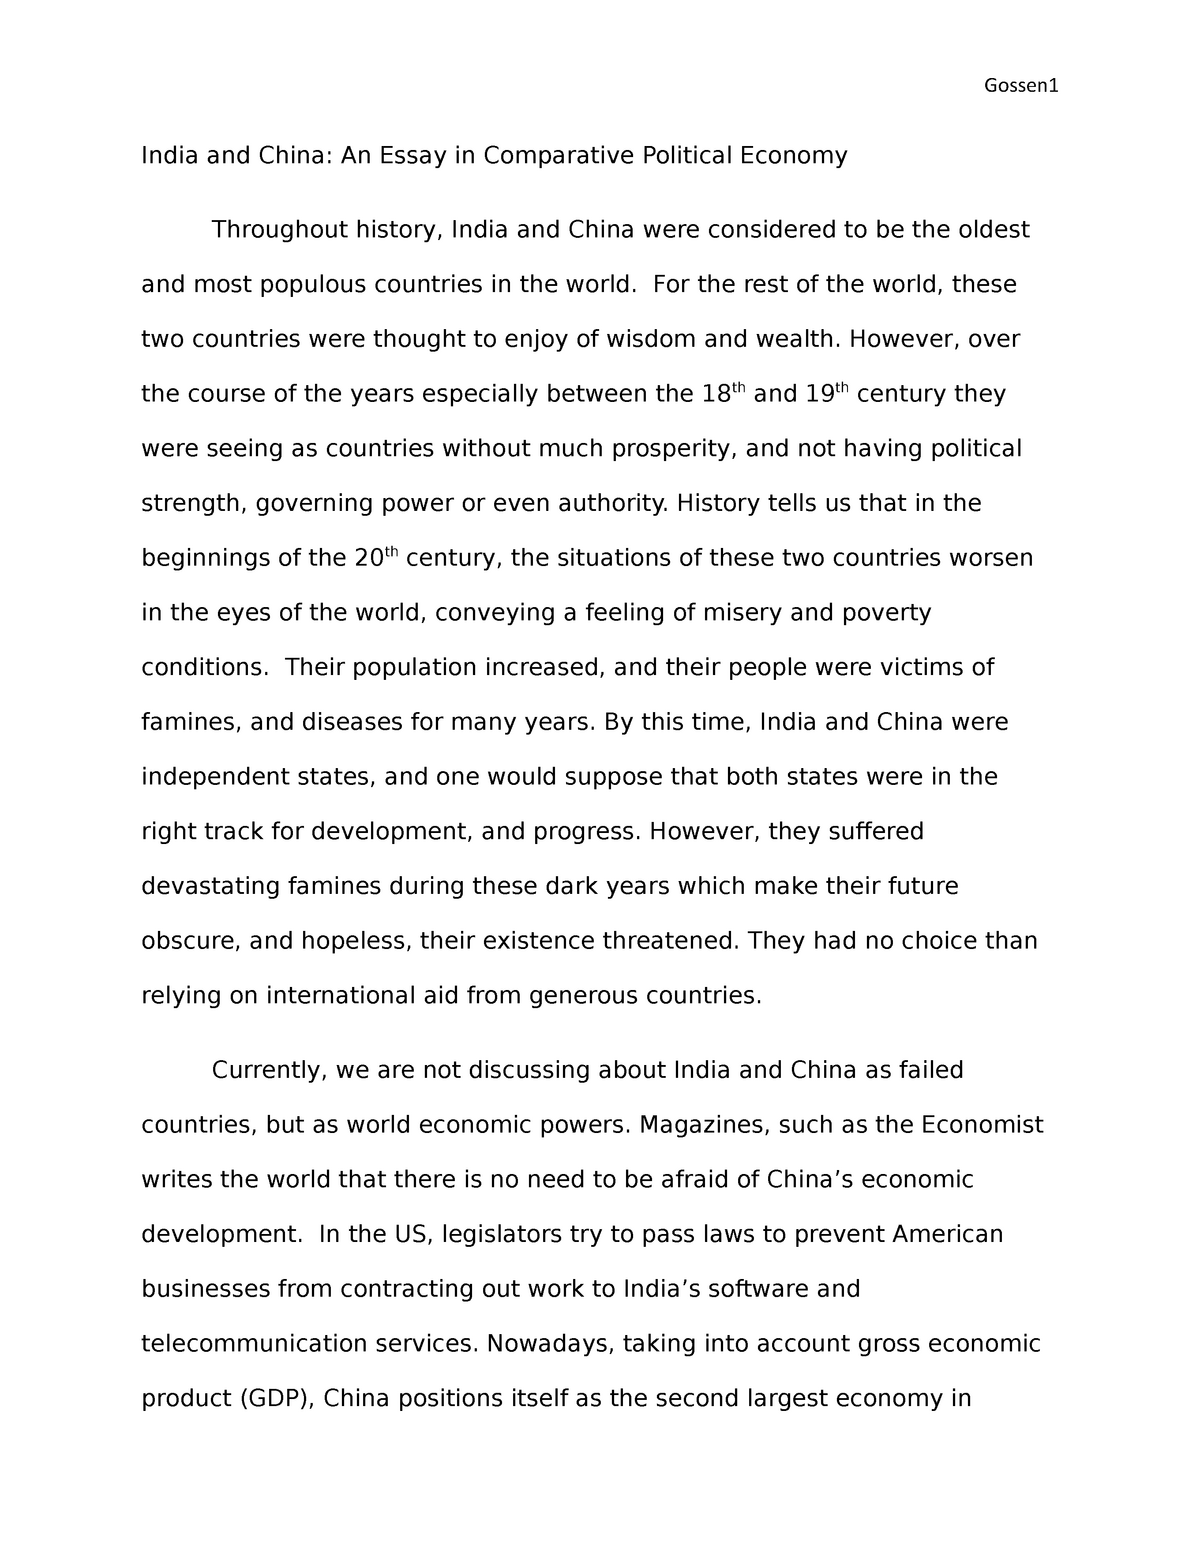 india china relations essay 300 words